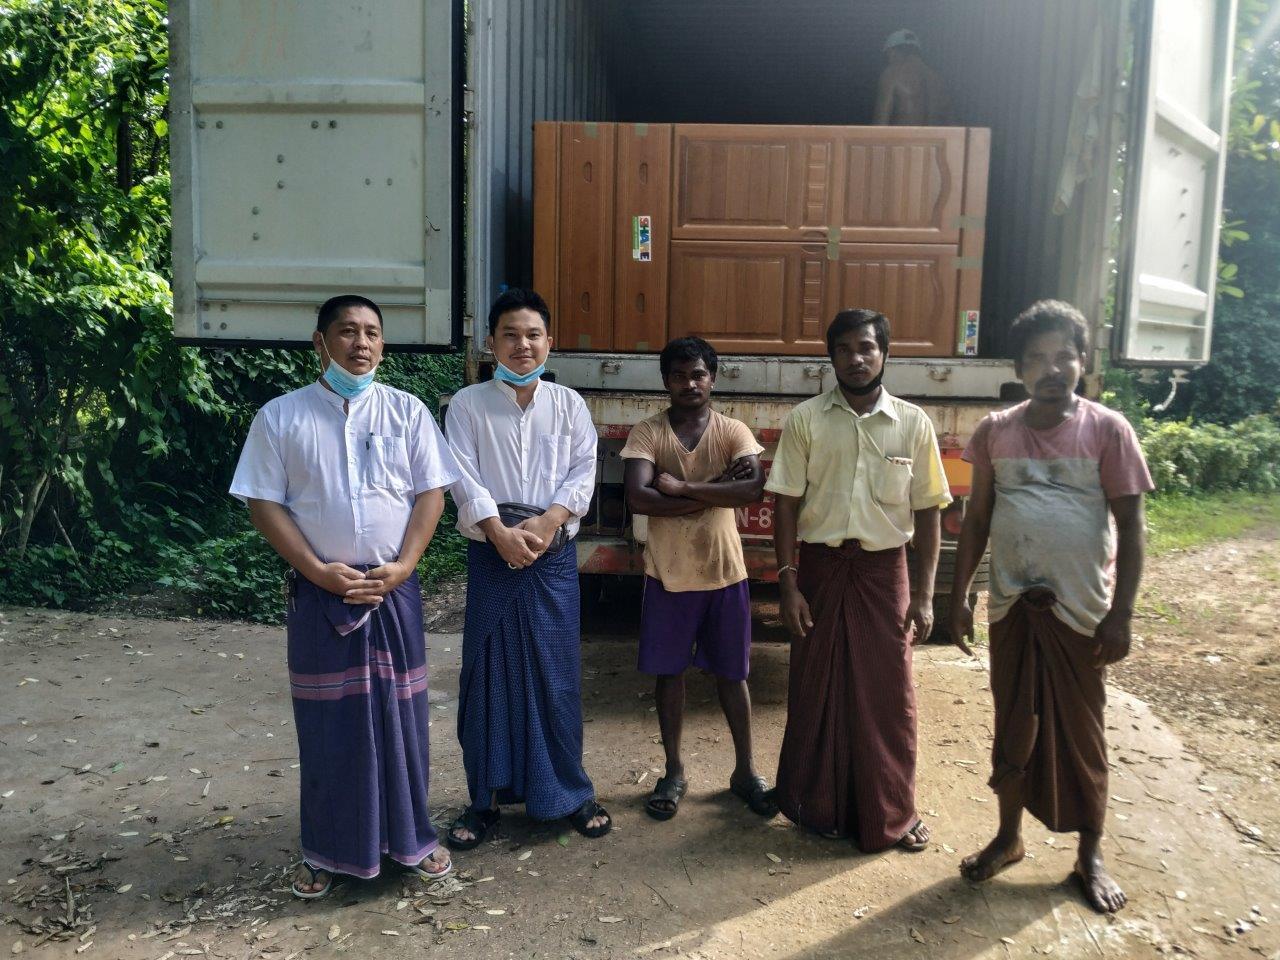 Medical supplies arrived at Mawlamyine Christian Leprosy Hospital and had a picture before unloaded the container